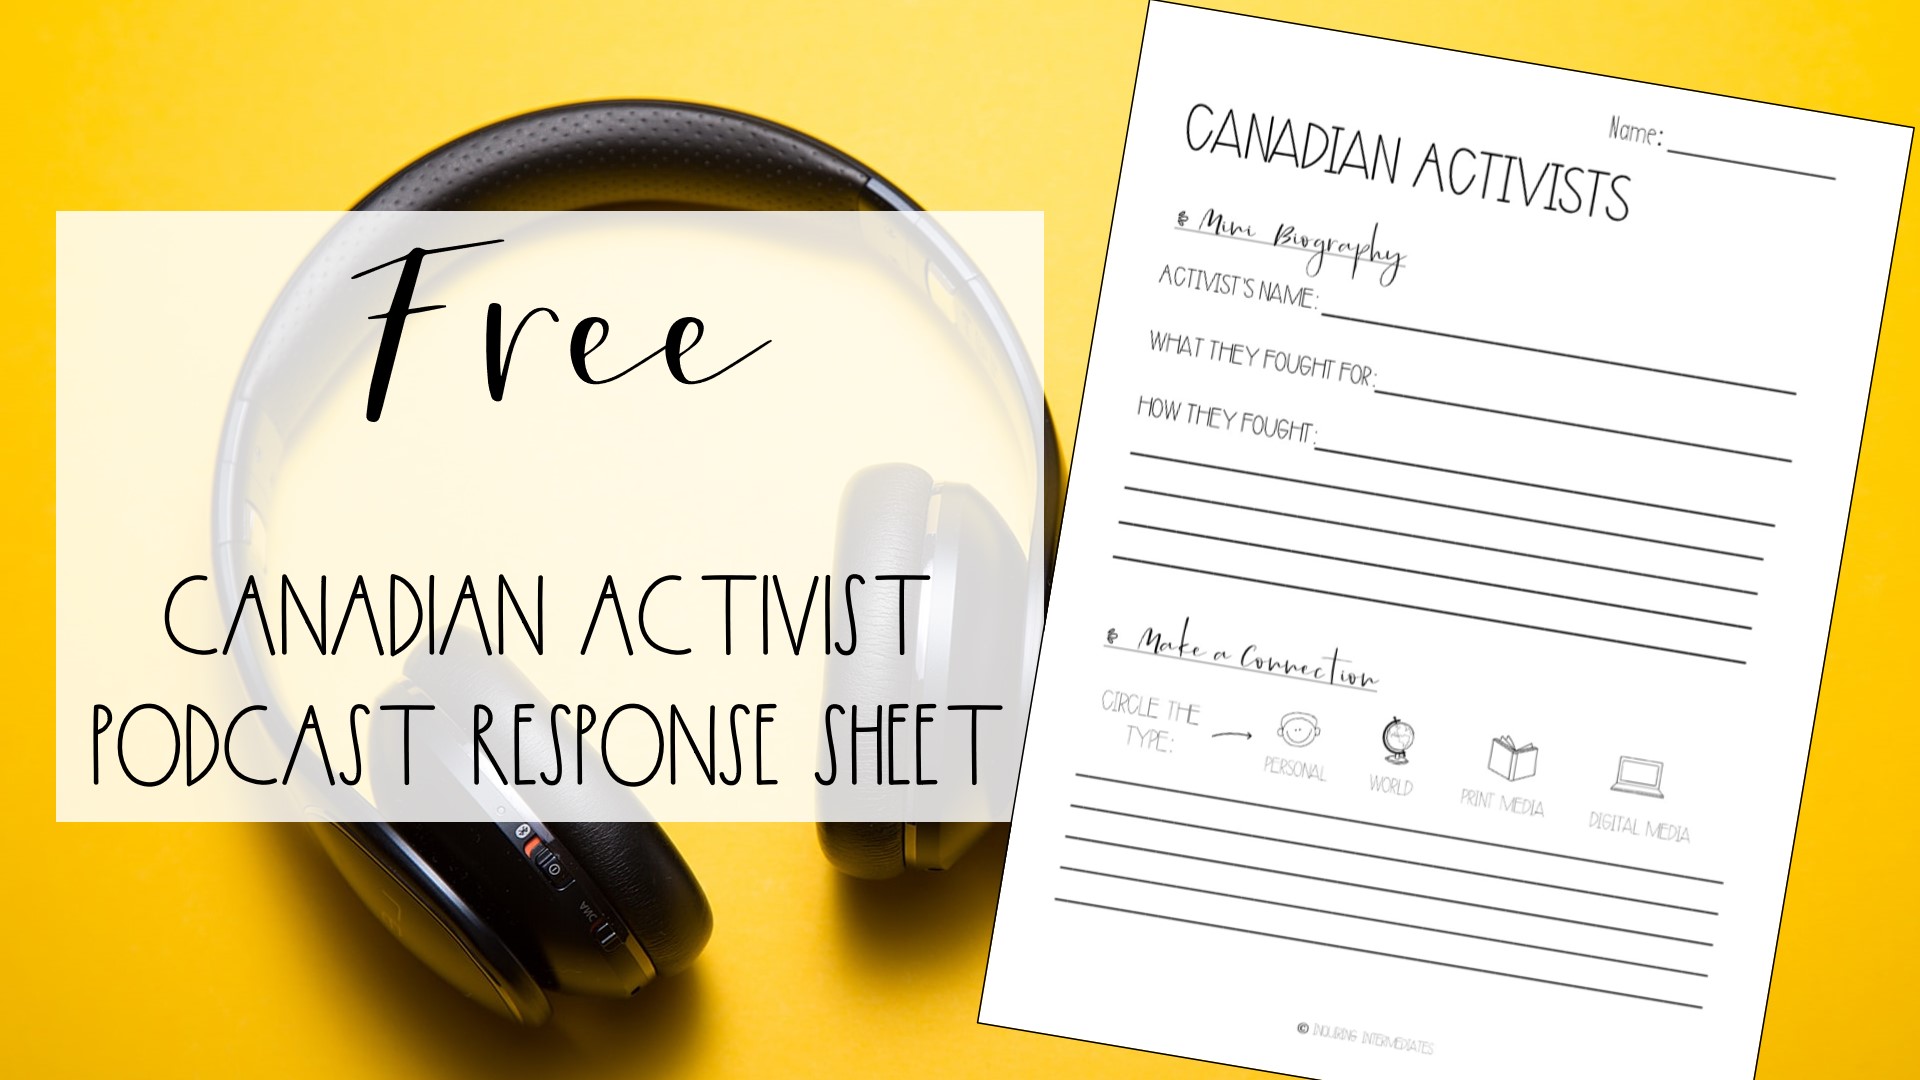 In the background, a pair of headphones on a yellow background. In the foreground, text that reads "Free Canadian Activist Podcast Response Sheet" and an image of the freebie to the right.